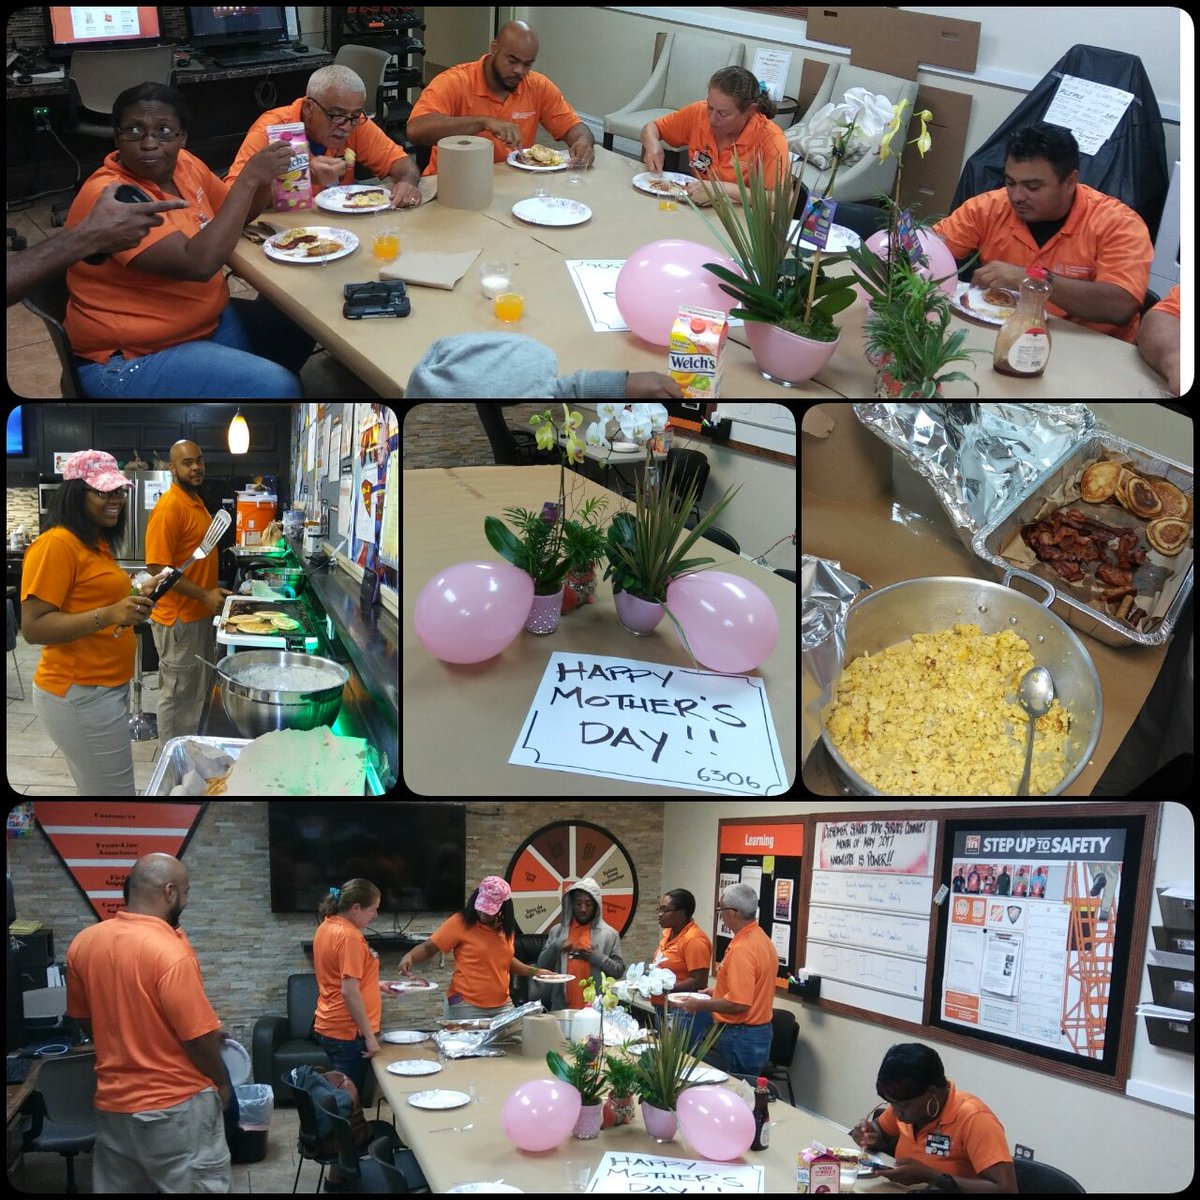 Better late then never.. Happy Mothers Day from Pinecrest! MET breakfast with the morning and night team. #6306 #MothersDay2017 #Pinecrest